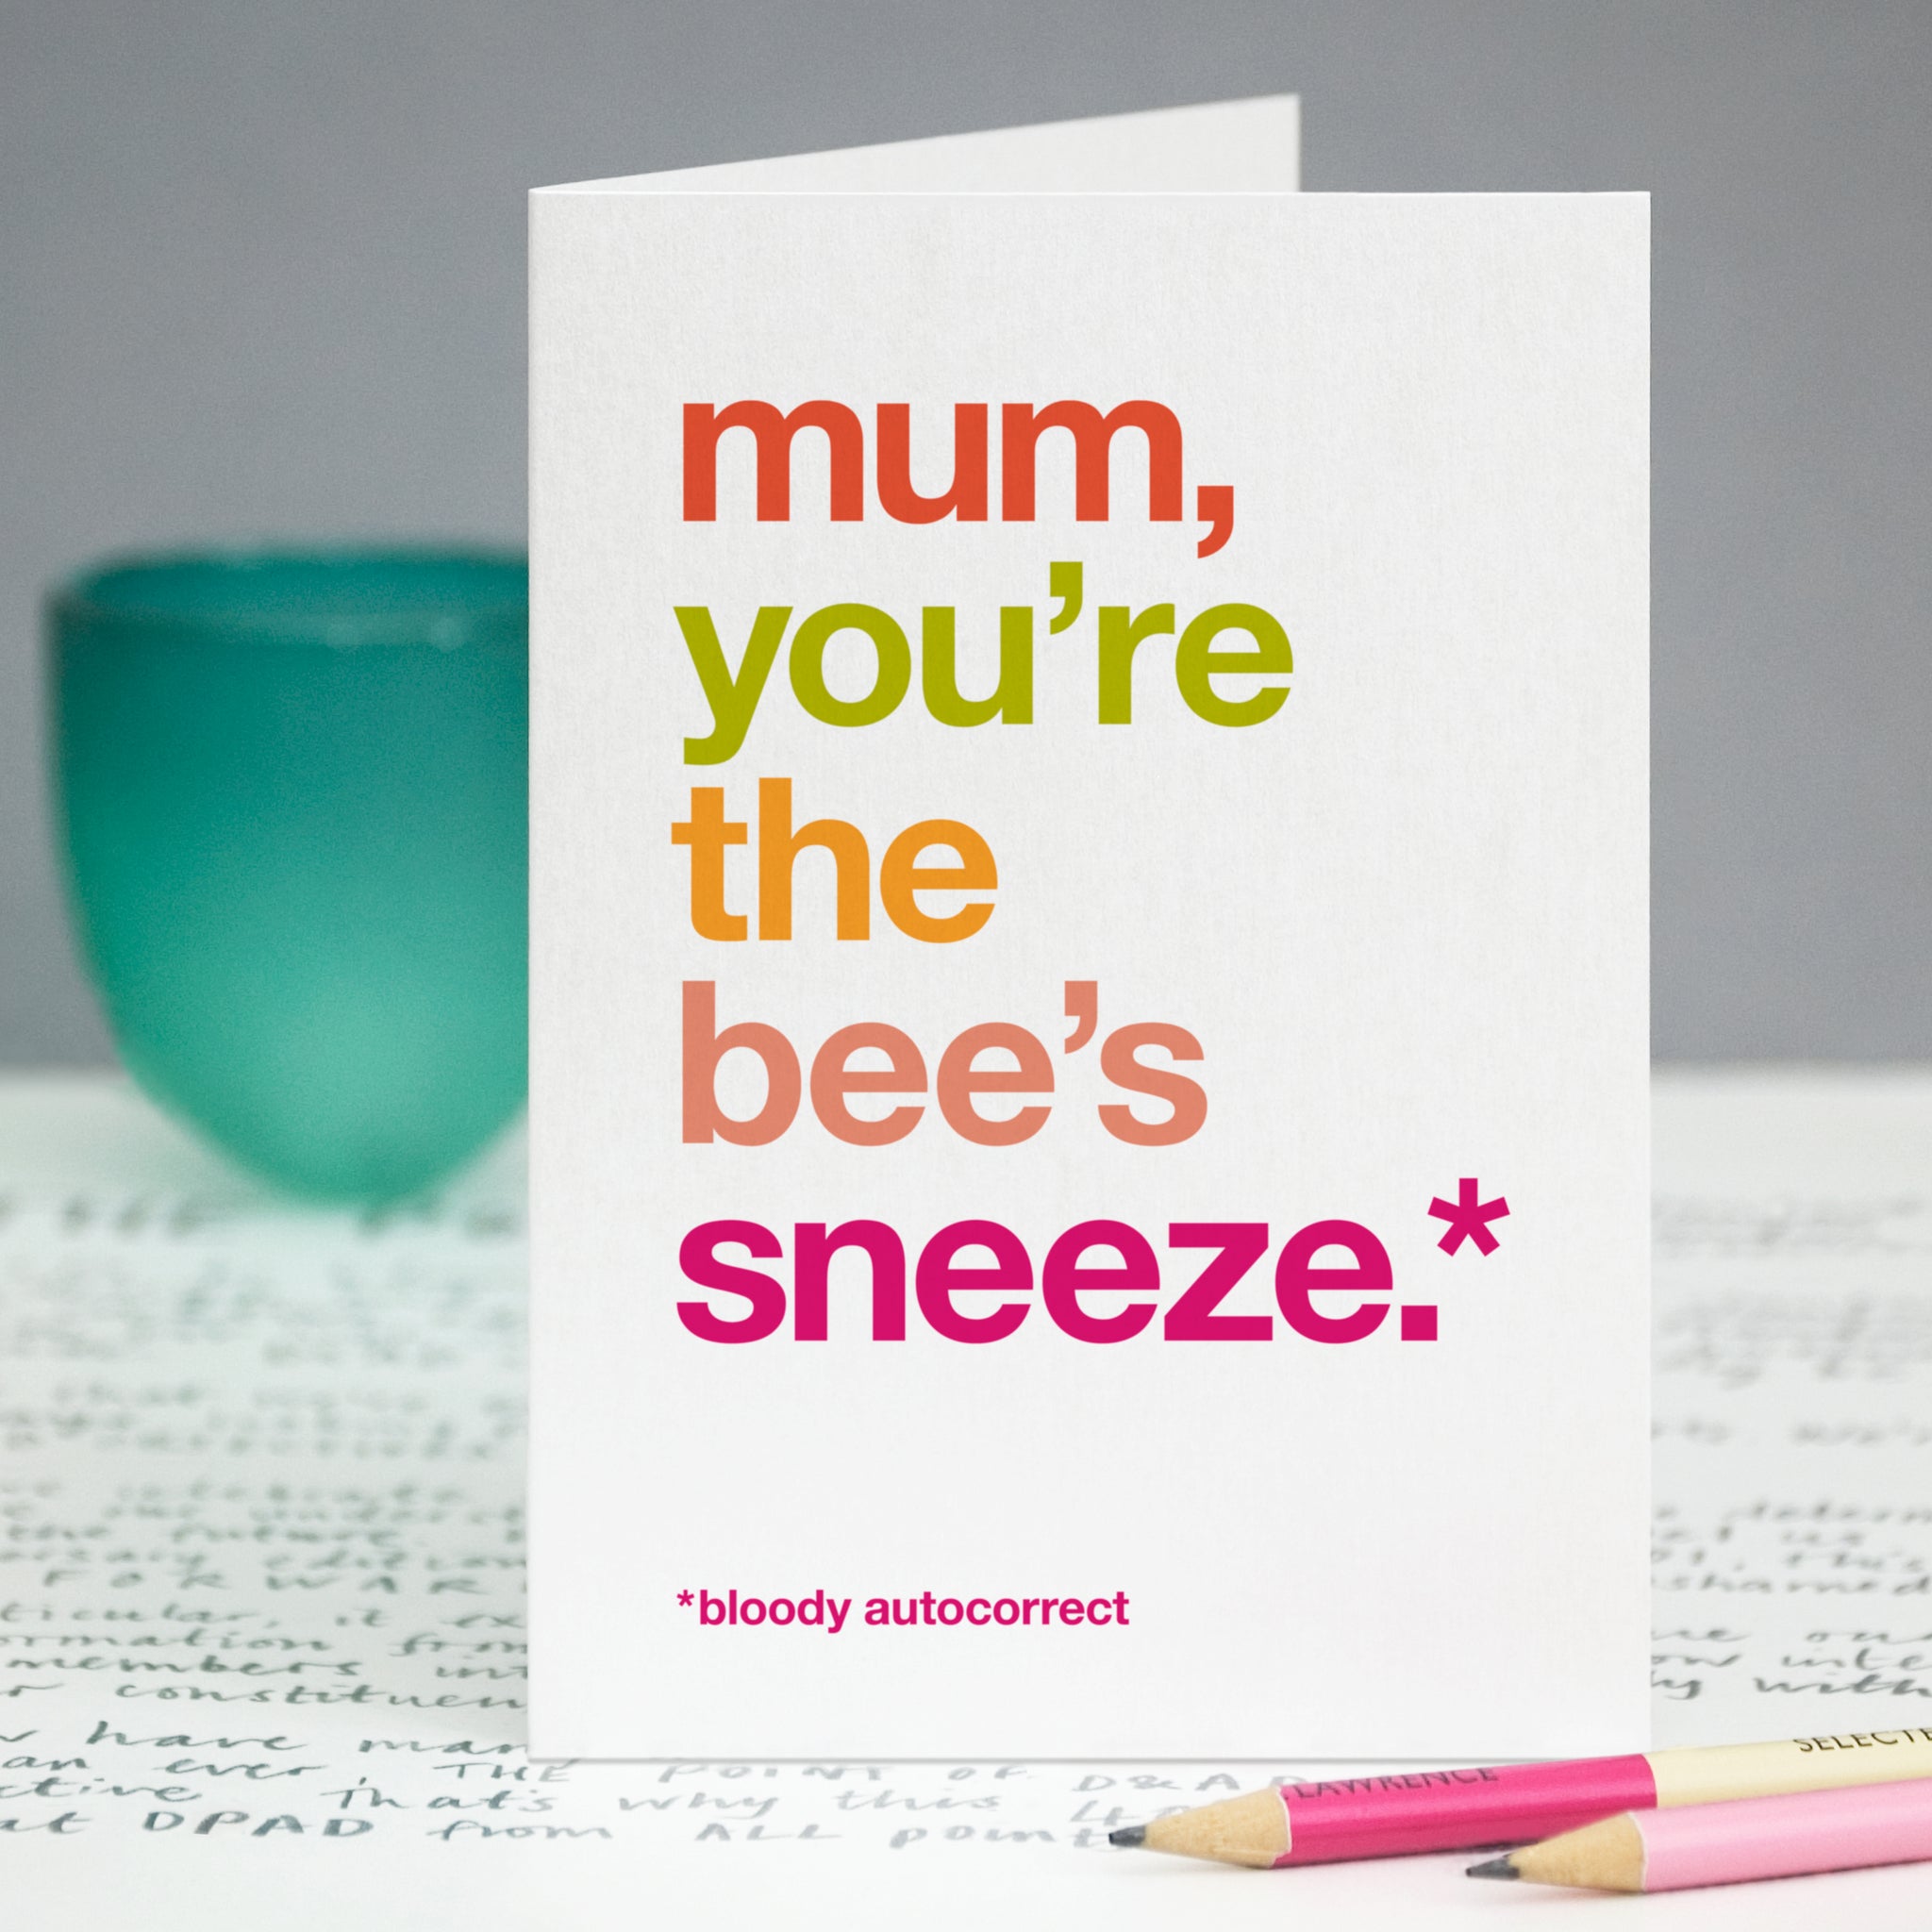 A greetings card with the text 'mum, you're the bee's sneeze, bloody autocorrect'.